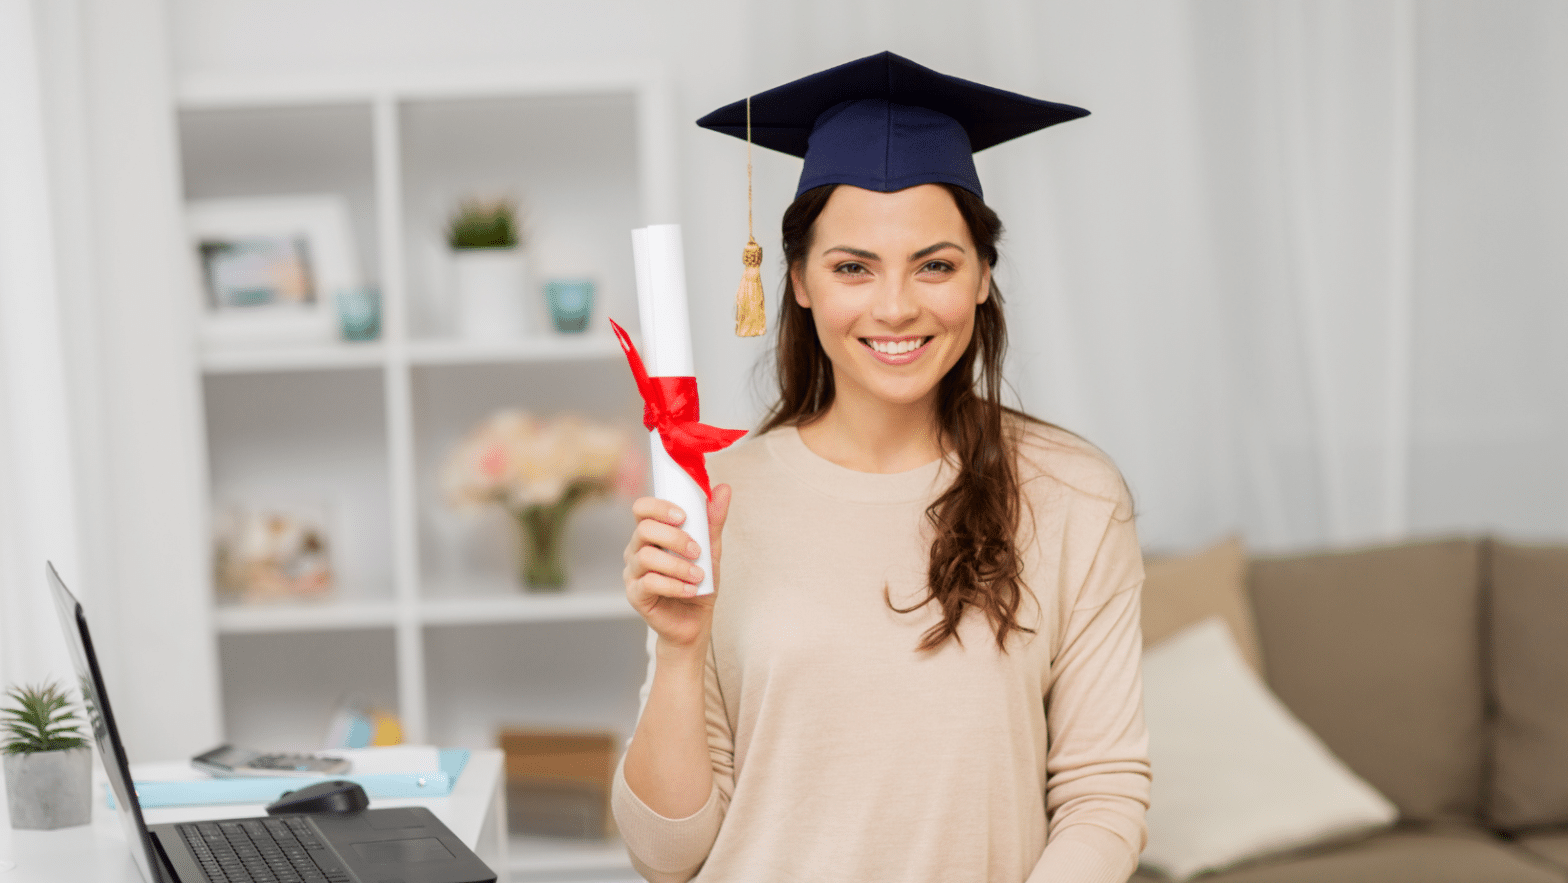 Finding the right fake diploma company can be a challenge.